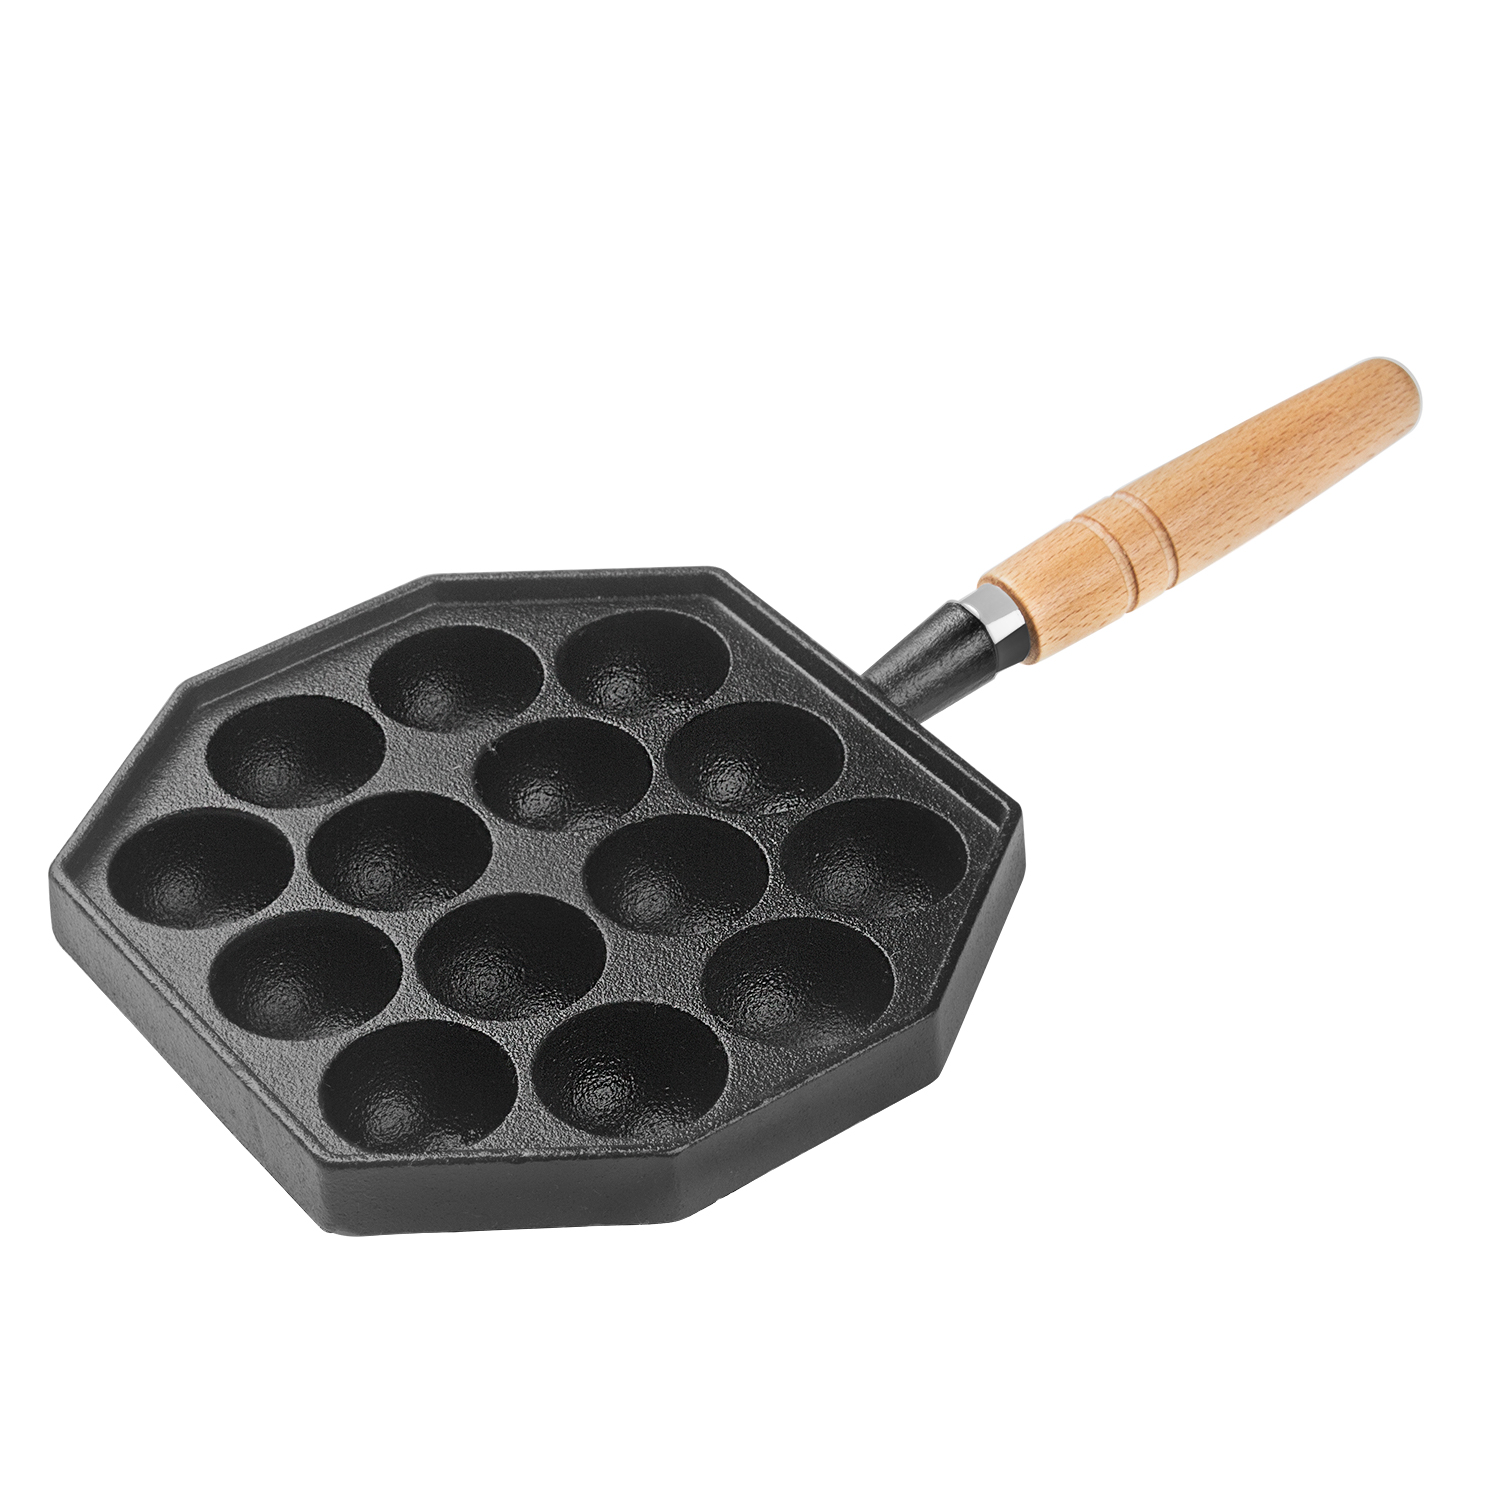 Indoor and Outdoor Cooking,Camping Stovetop BBQ,Baking Cake Pops Grill 16 holes /4cm,thicken iron Cooker King Seasoned Cast Iron Takoyaki Pan 